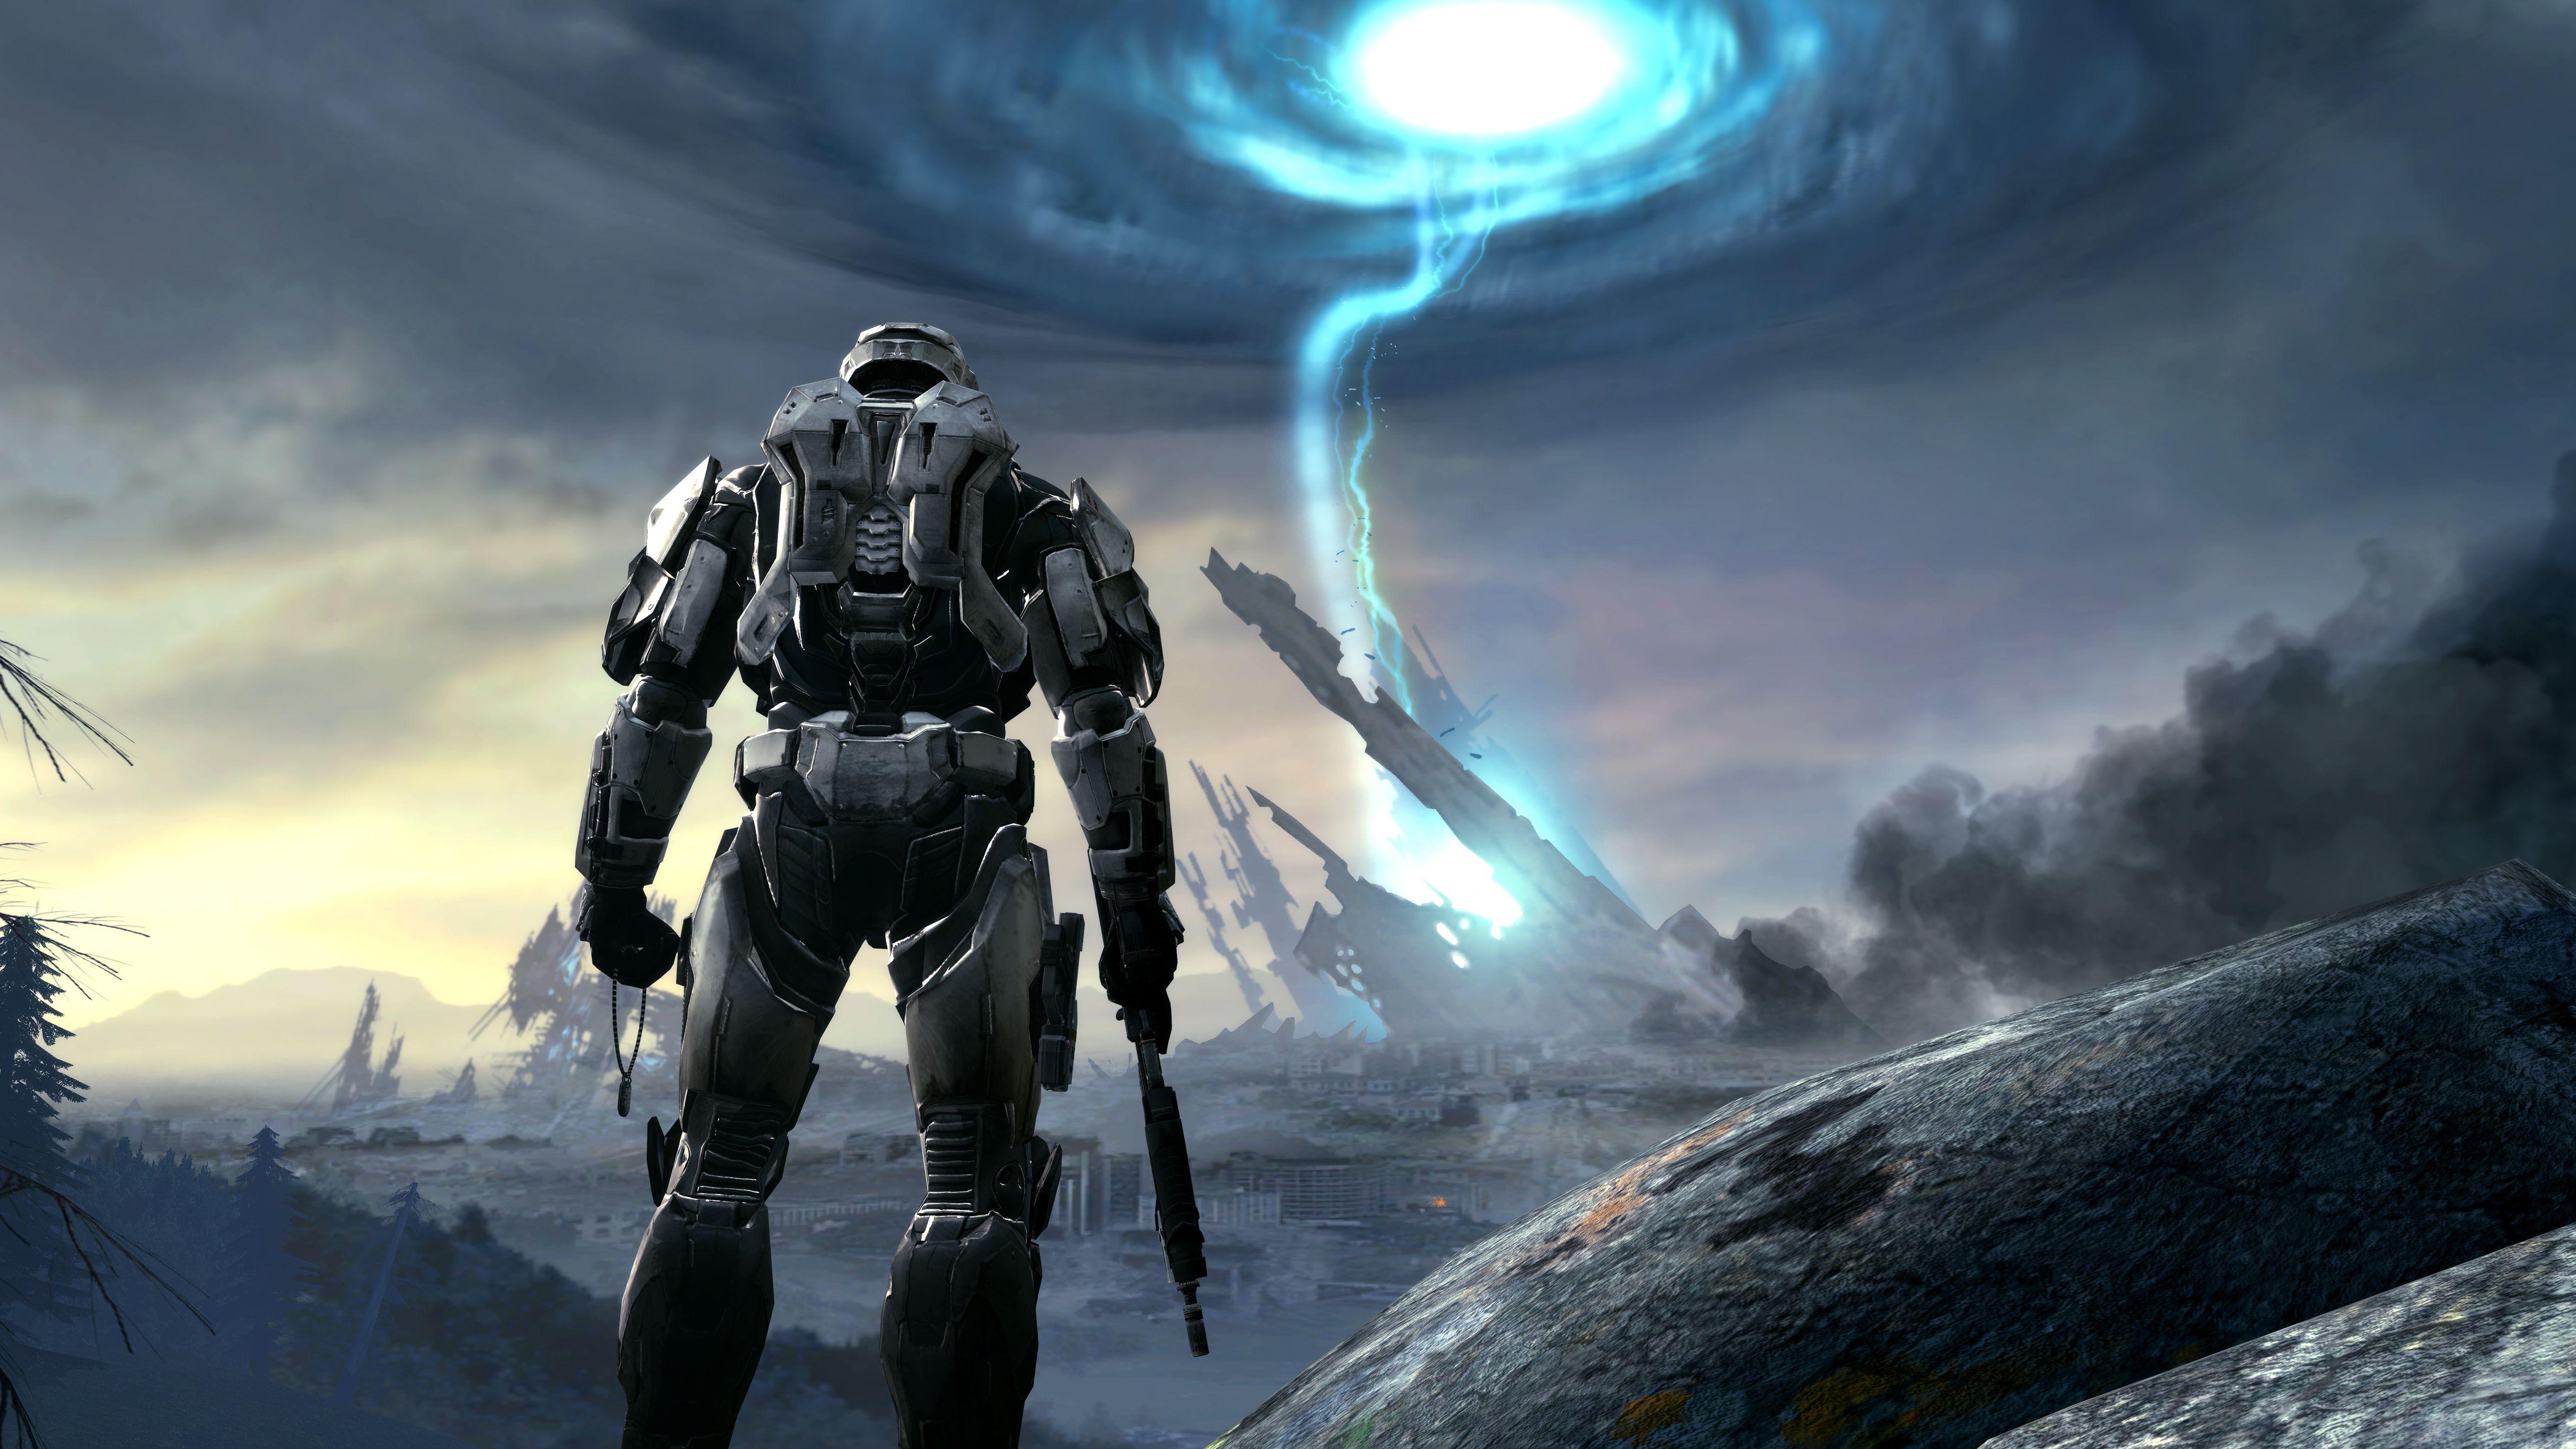 Halo iPod Wallpapers - Top Free Halo